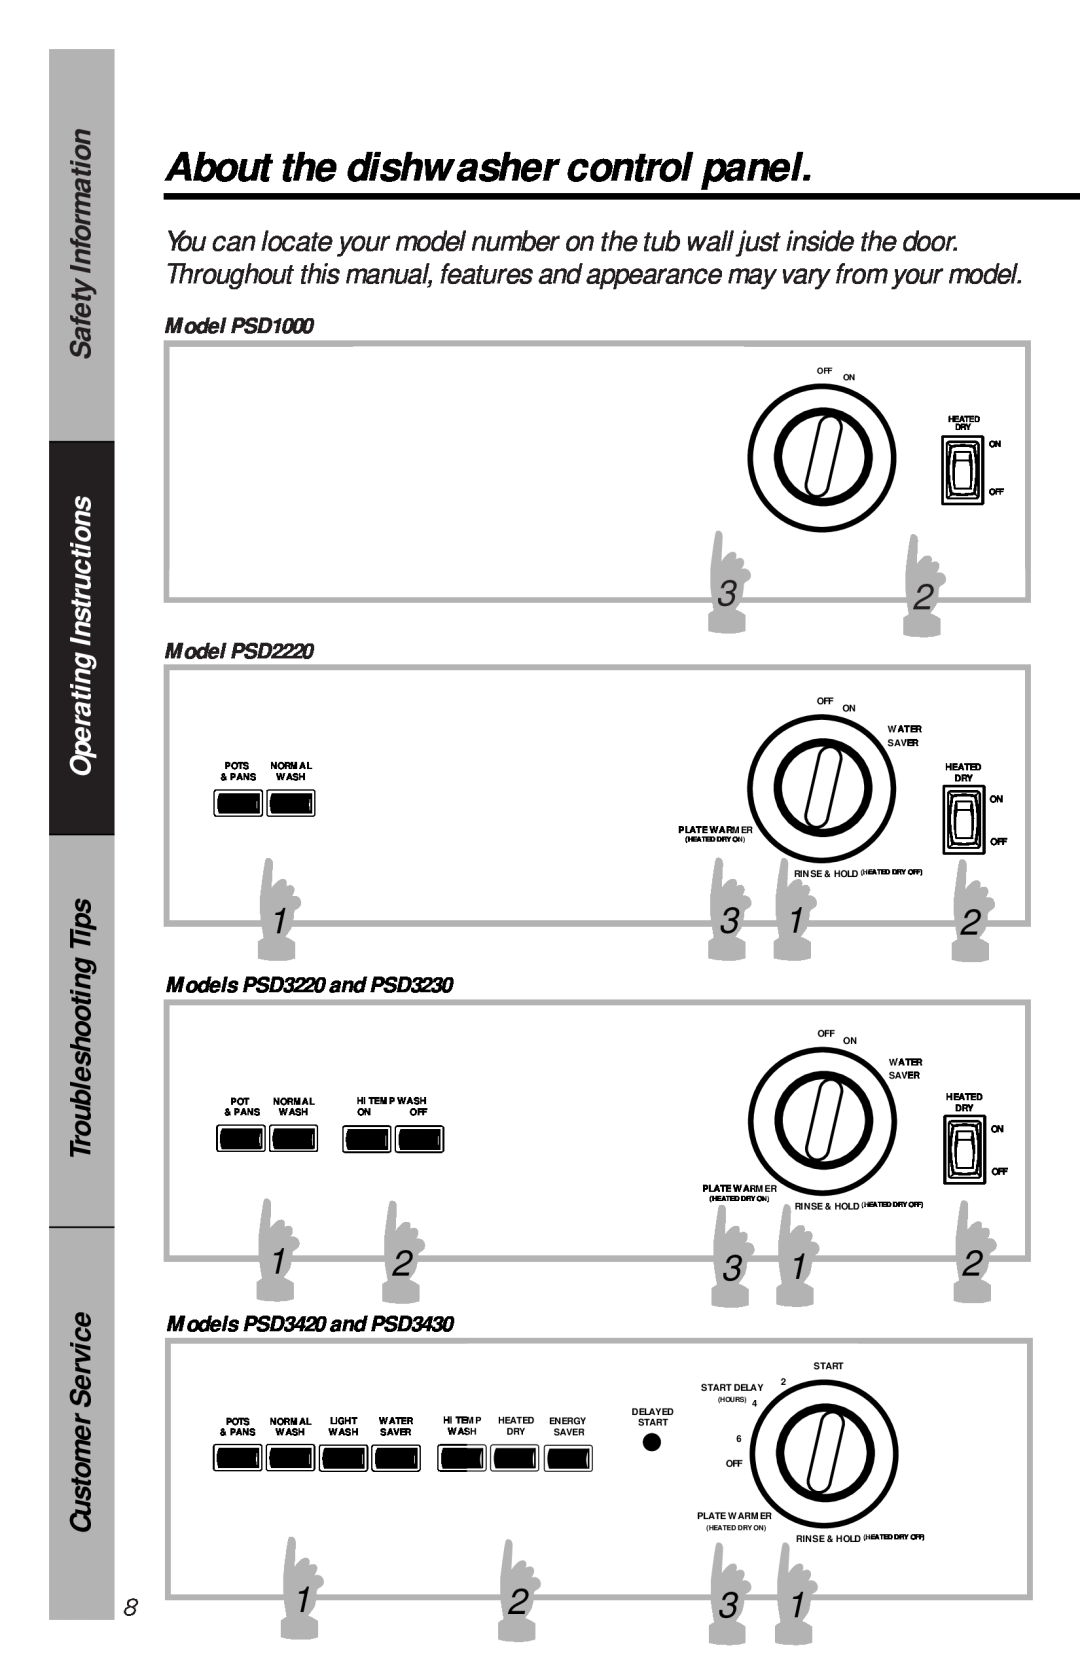 RCA PSD3430, PSD1000, PSD3220, 165D3527P035, PSD3230, PSD3420 About the dishwasher control panel, Operating Instructions 